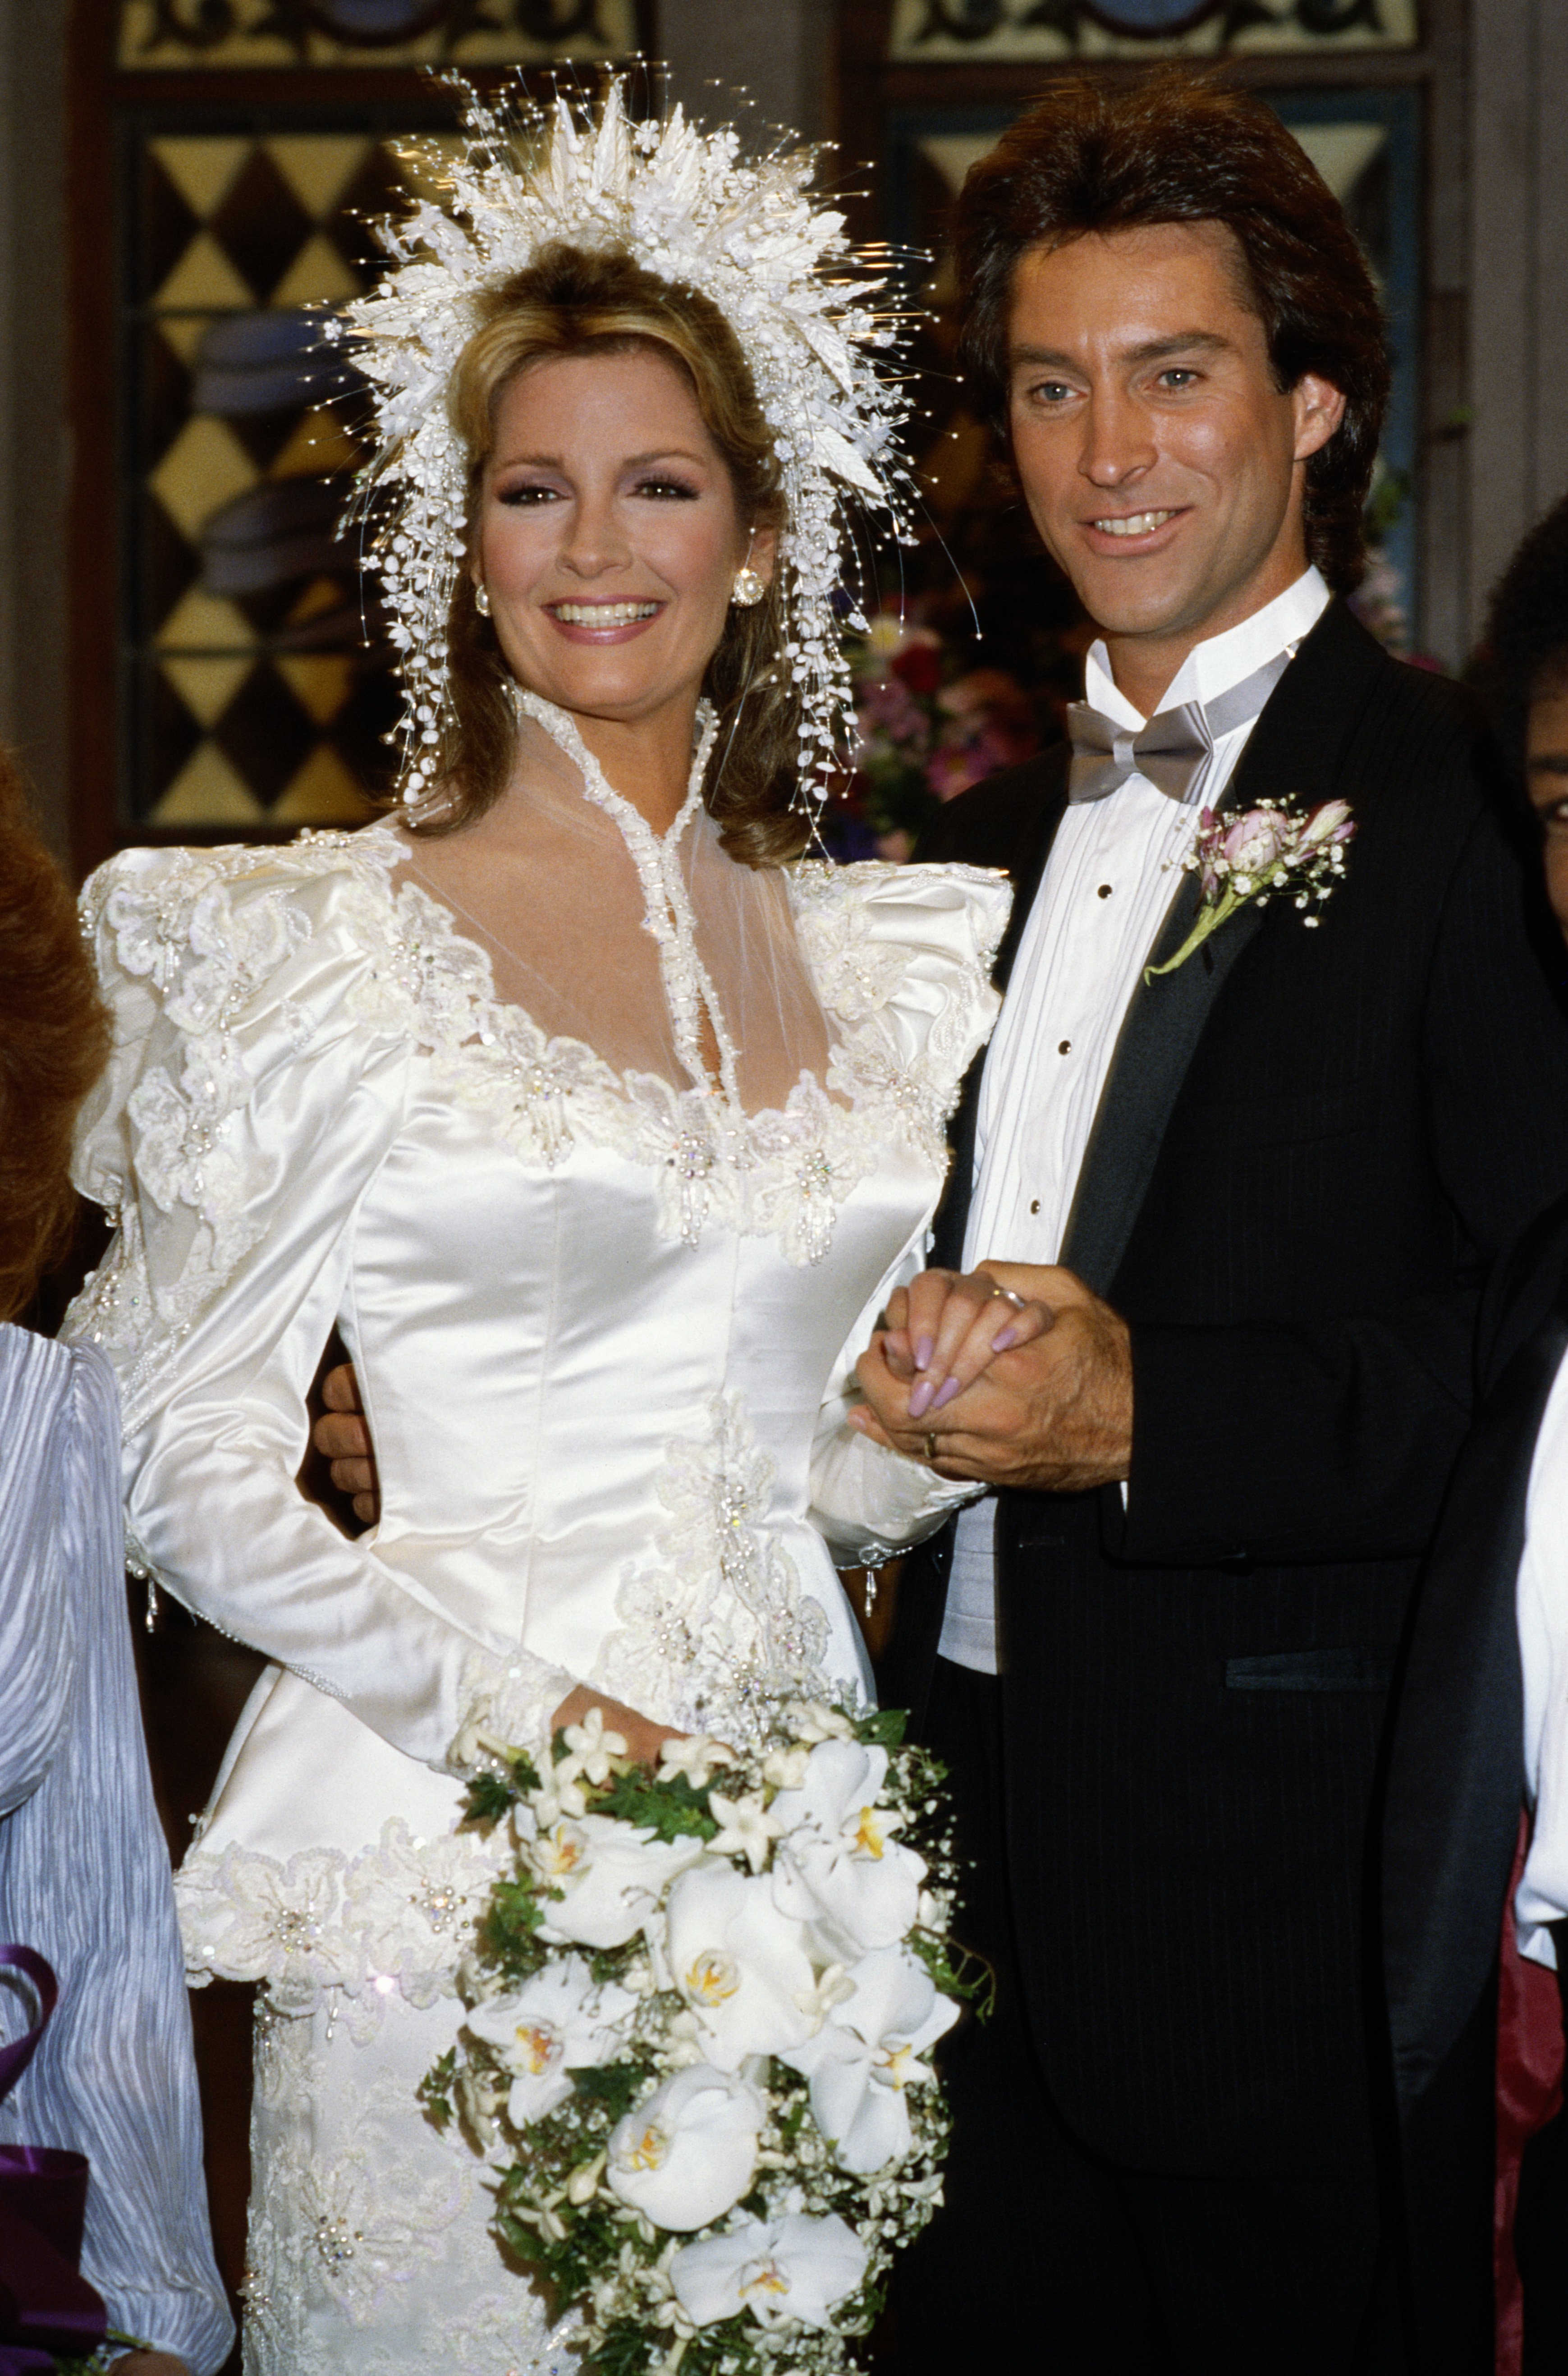 Actress Deidre Hall starring as Dr. Marlena Evans with actor Drake Hogestyn as John Black in a wedding scene from the soap opera "Days of Our Lives," on January 1, 2005 | Source: Getty Images